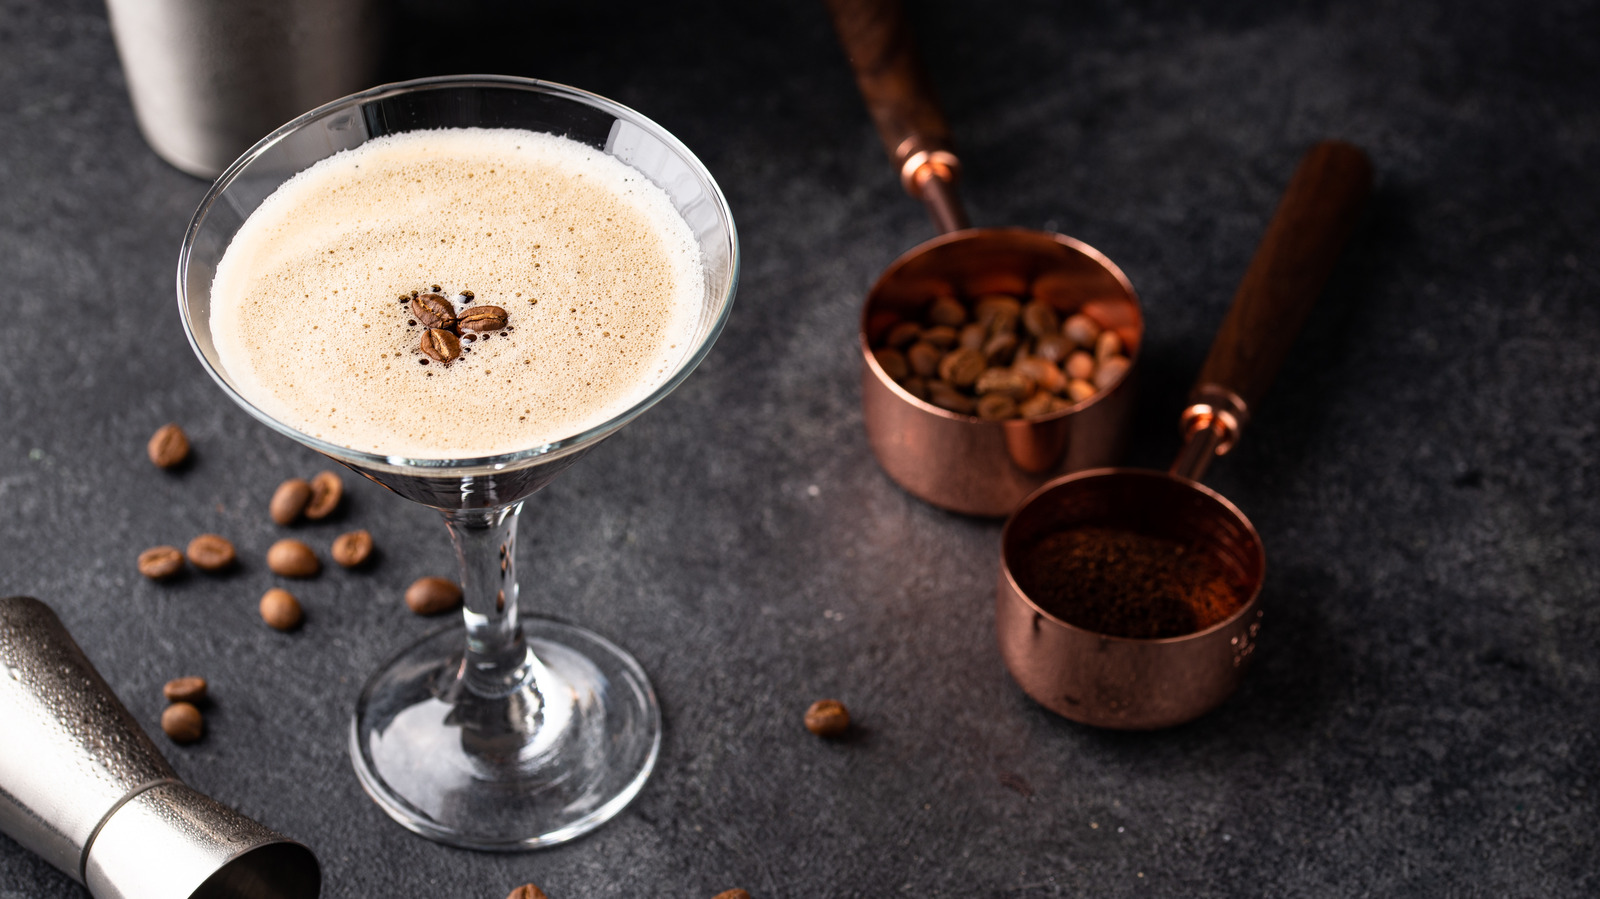 https://www.tastingtable.com/img/gallery/18-ingredients-to-elevate-your-next-espresso-martini/l-intro-1685715094.jpg